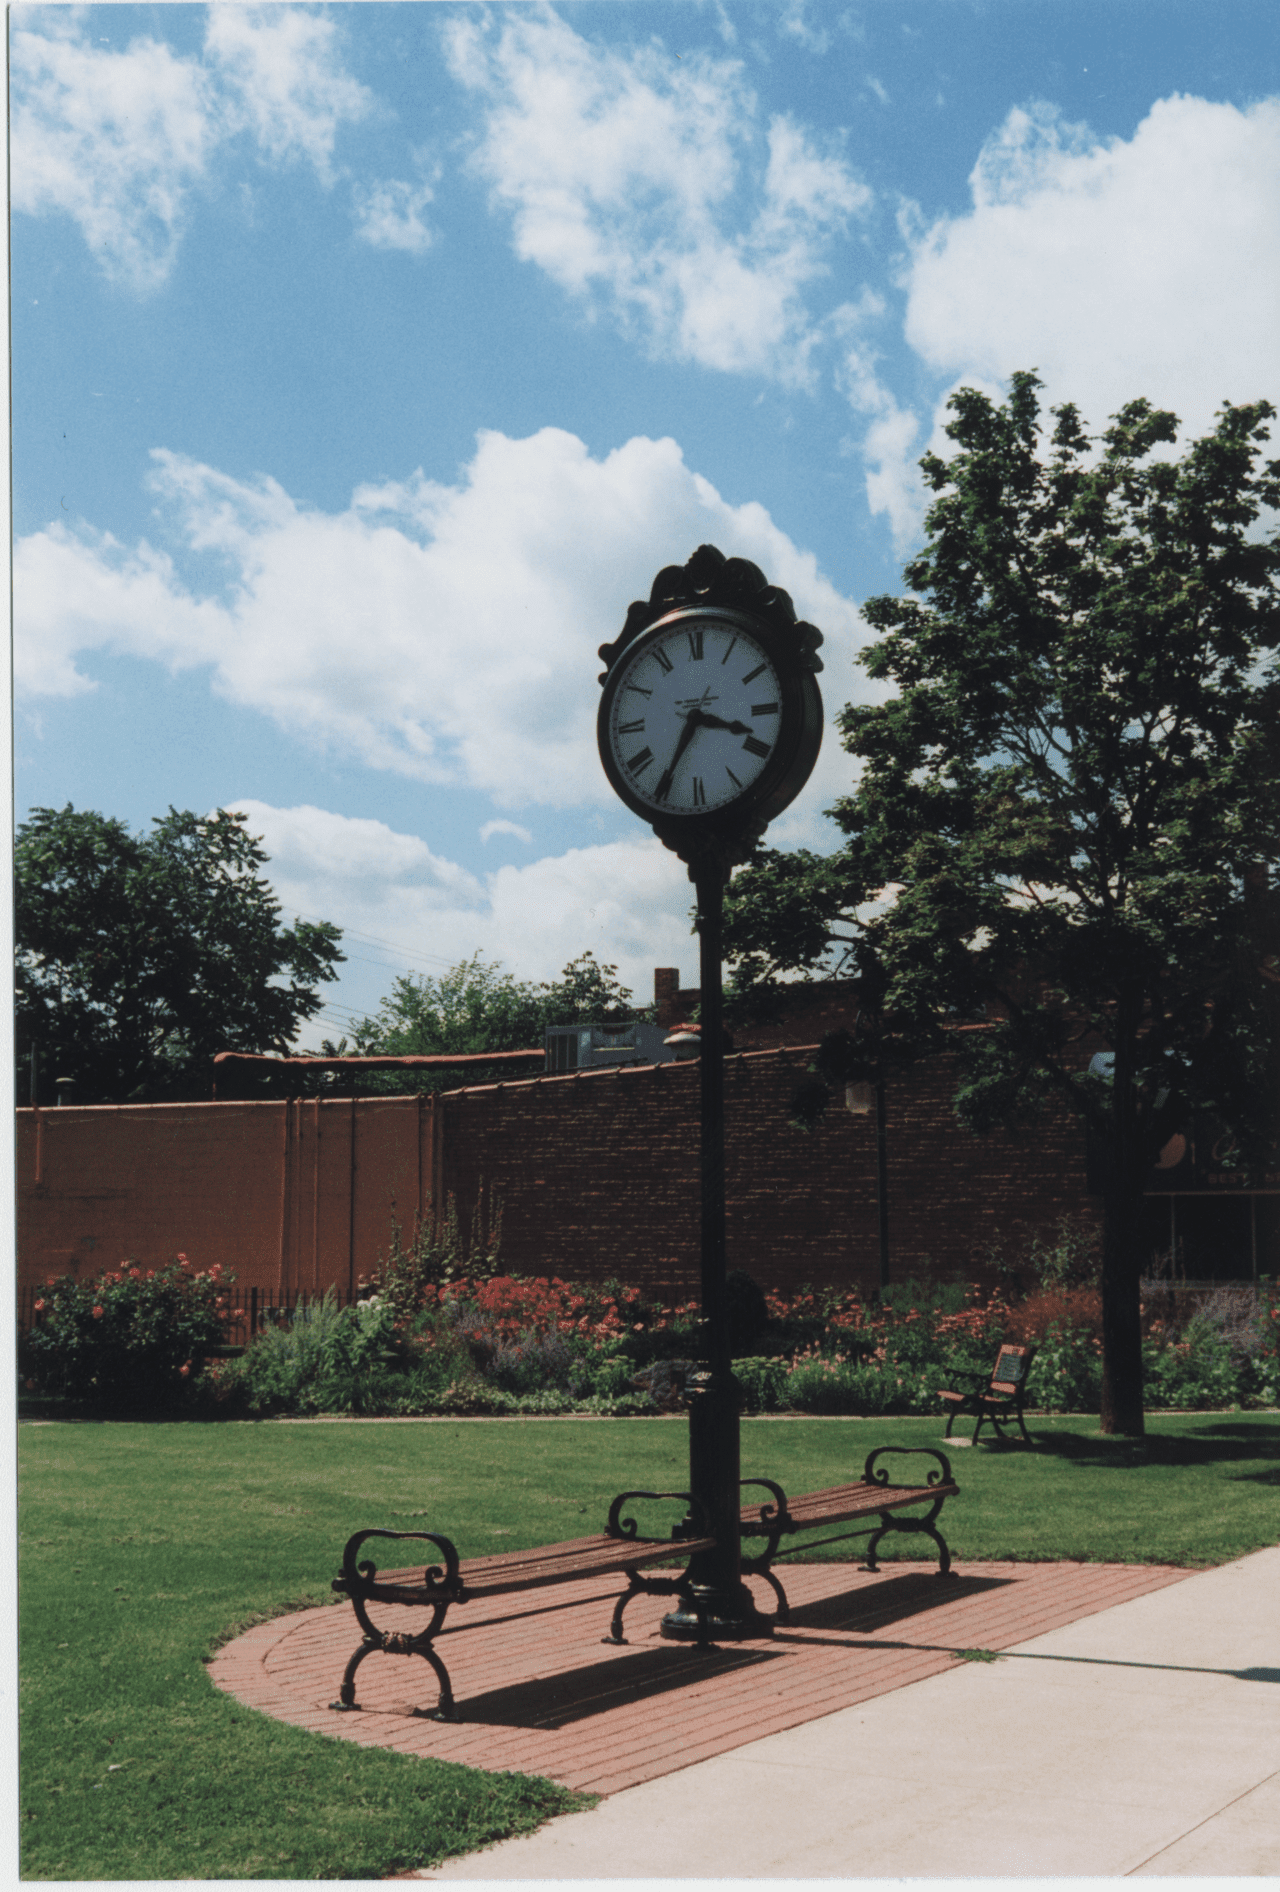 Centennial Park clock on a sunny day in Downtown Oxford